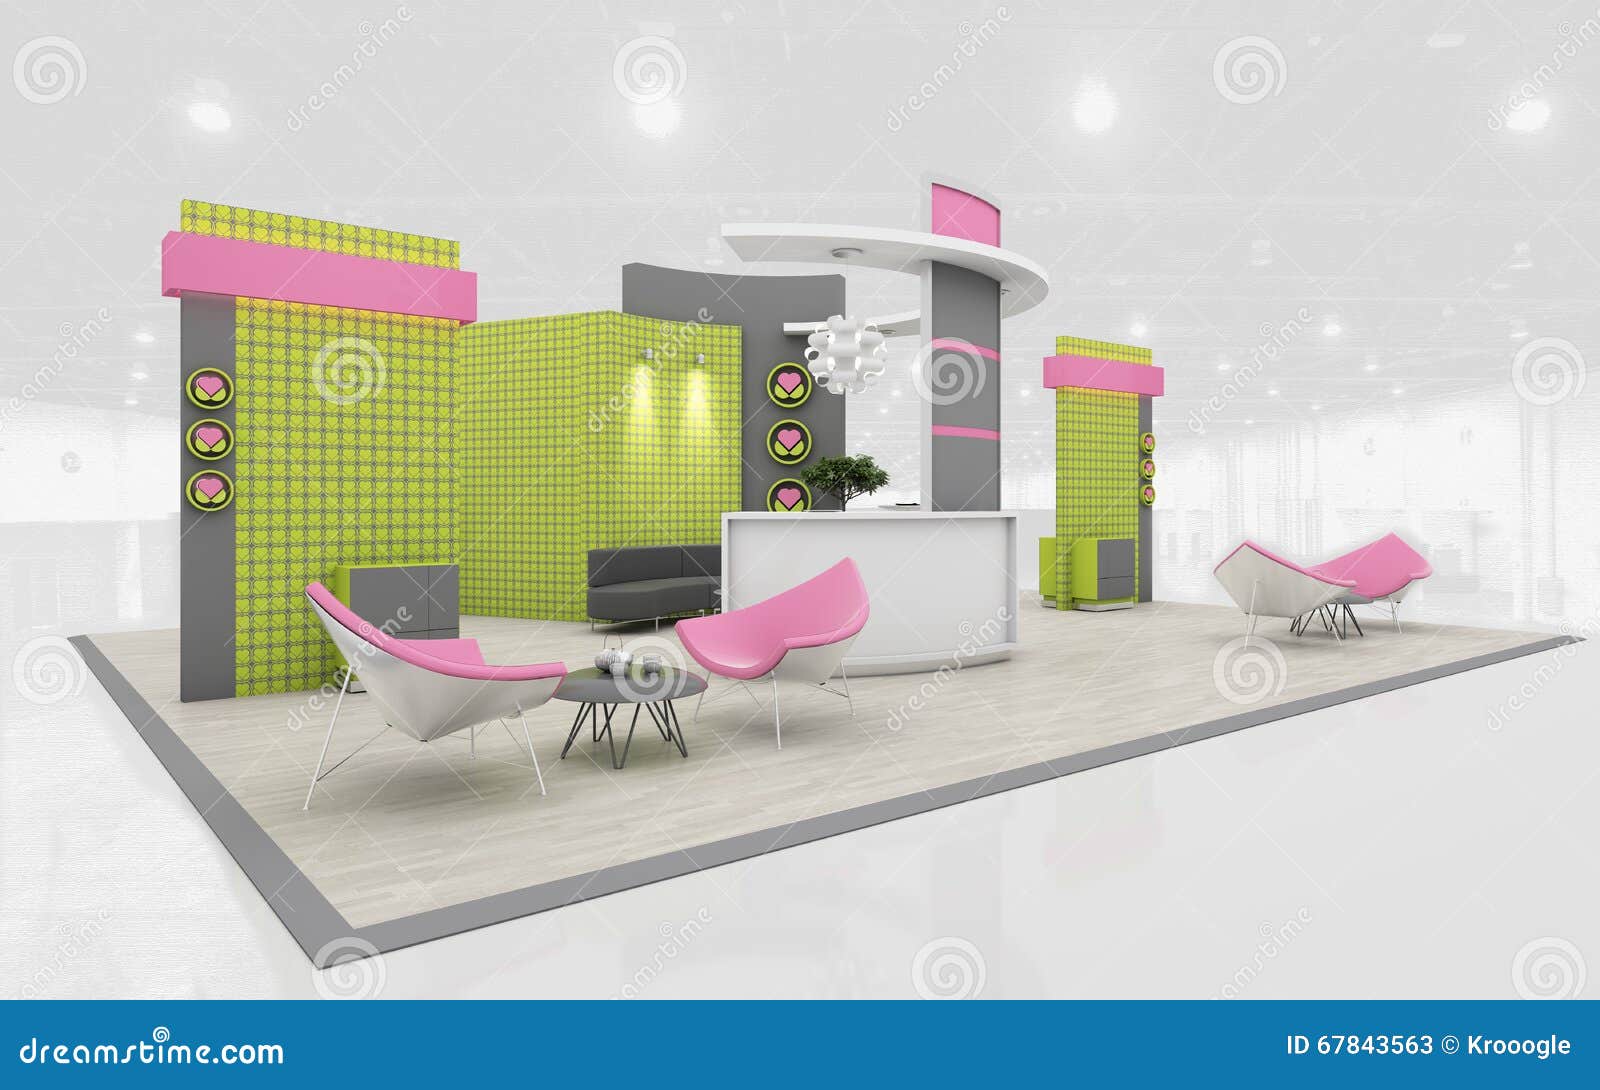 exhibition stand in green and pink colors 3d rendering